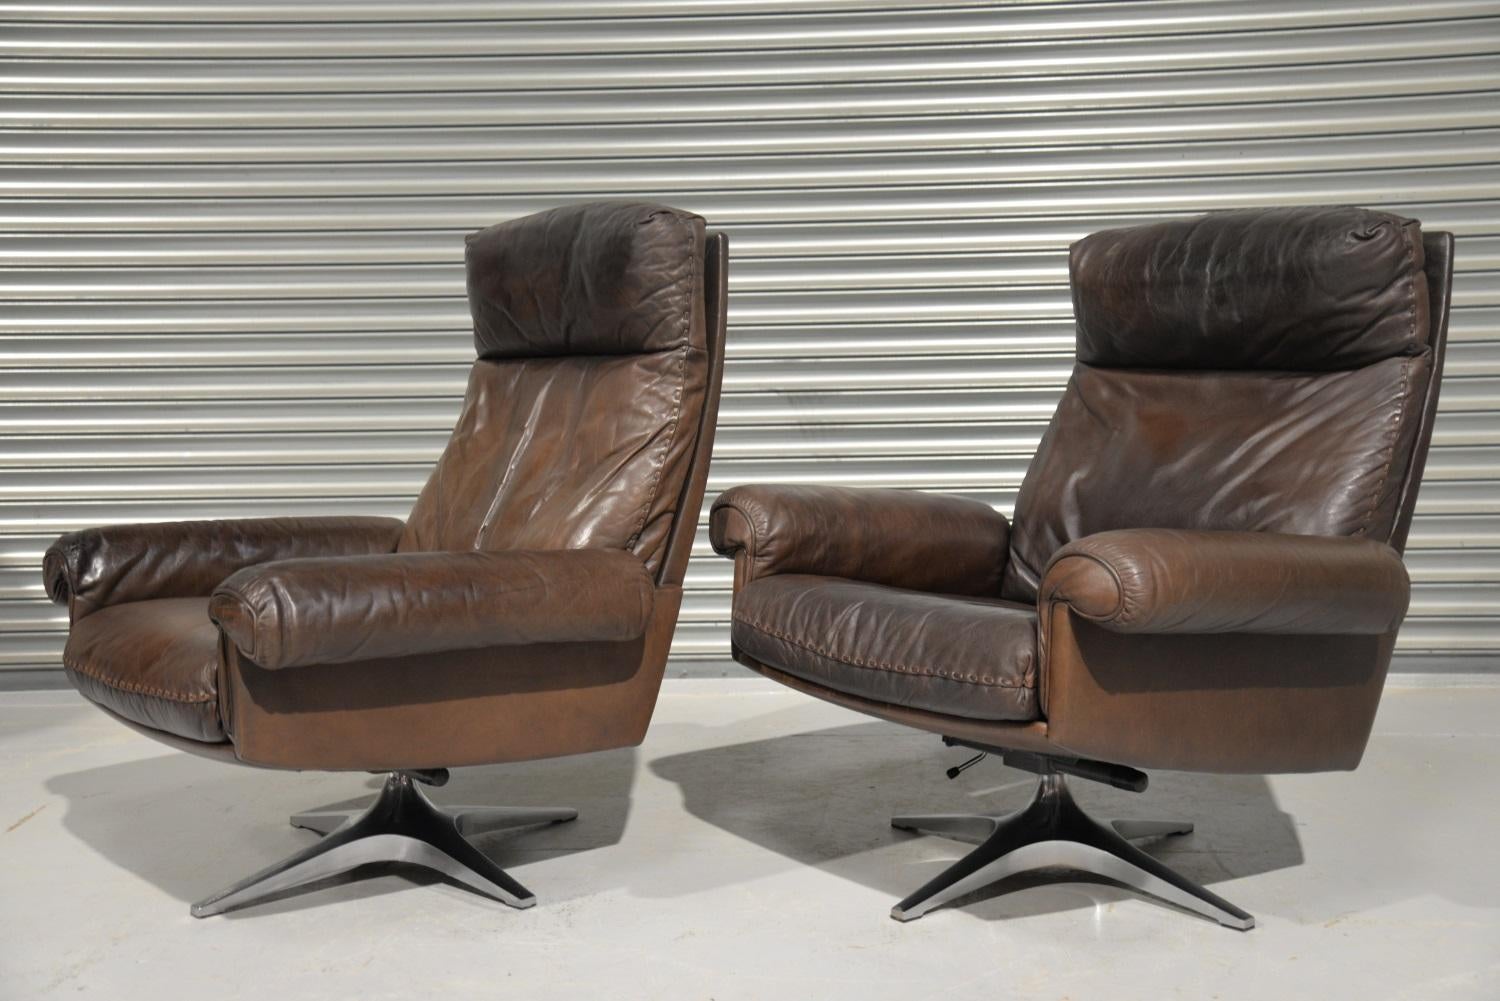 We are delighted to bring to you two vintage De Sede DS 31 highback swivel armchairs. Hand built in the early 1970s by De Sede craftsman in Switzerland these lounge swivel armchairs are in beautiful soft brown aniline leather with superb whipstitch